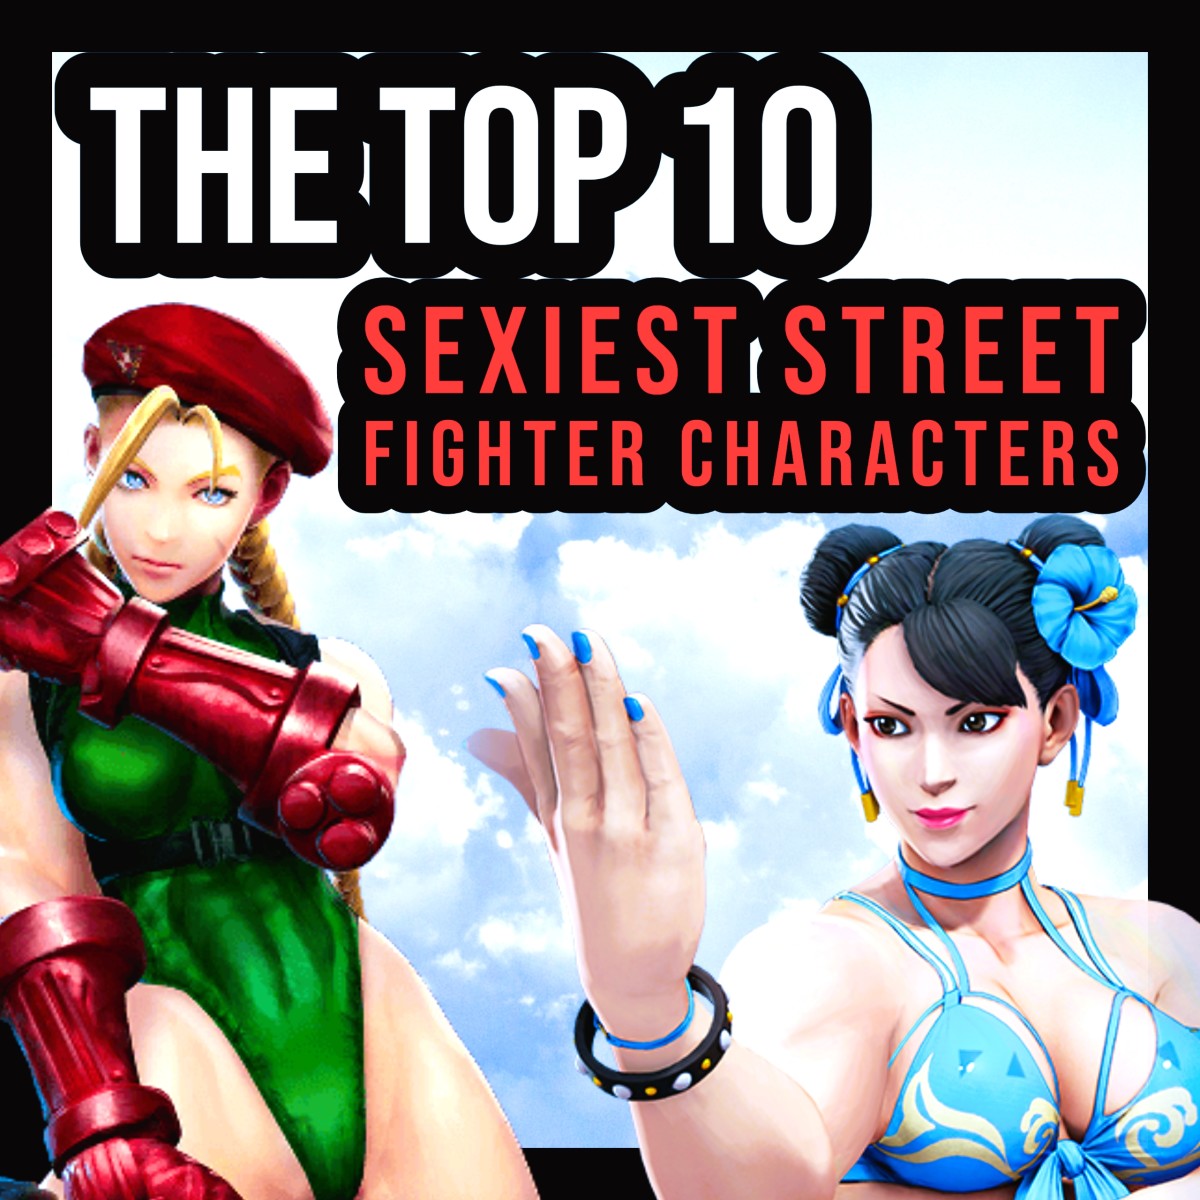 The Top 10 Sexiest Street Fighter Characters